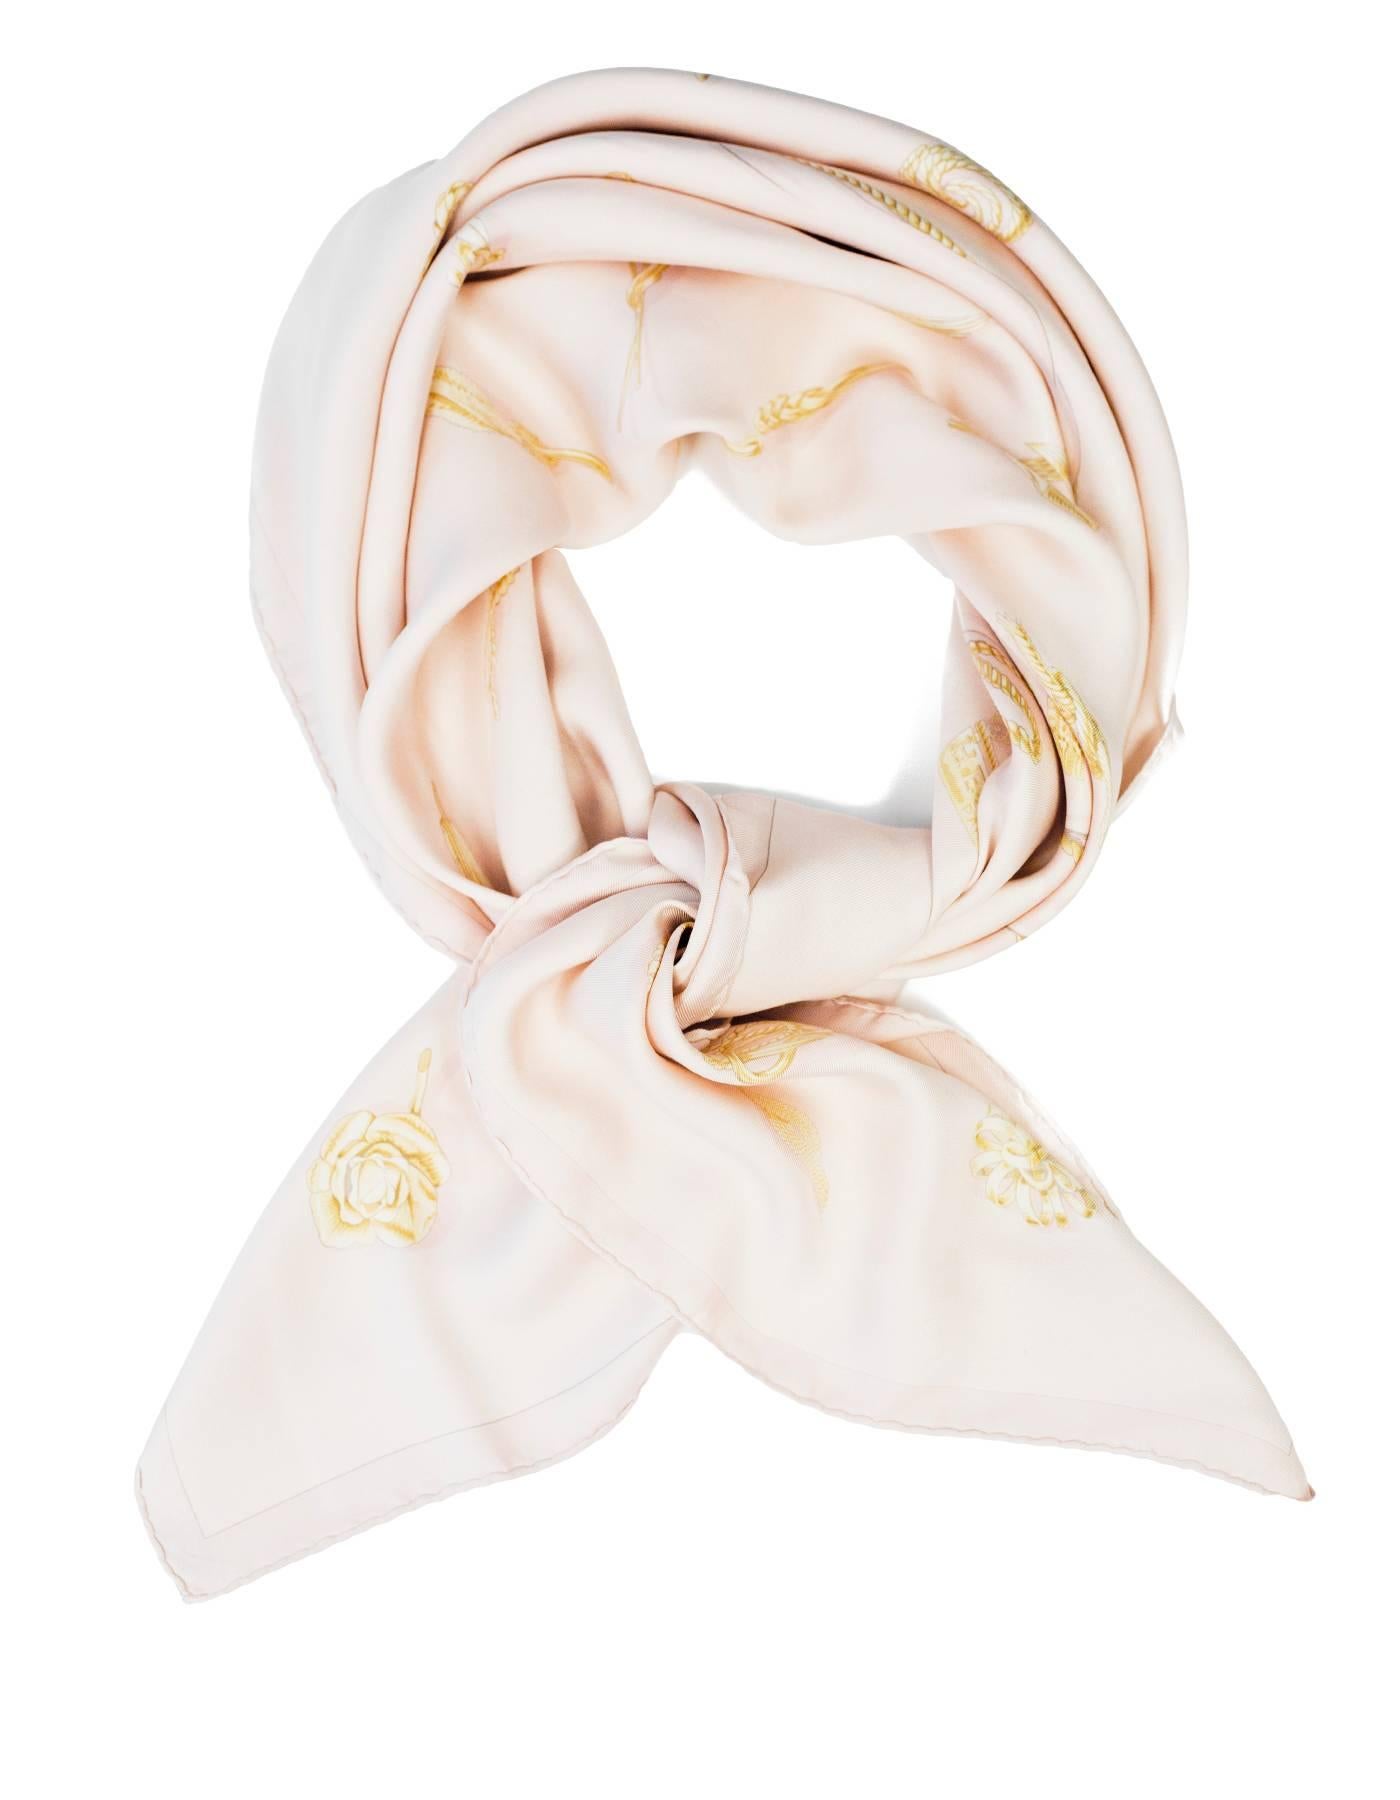 Hermes Pink Clips Silk 90cm Scarf

Made In: France
Color: Light pink
Composition: 100% Silk
Retail Price: $395 + tax
Overall Condition: Excellent pre-owned condition

Measurements:
Length: 35"
Width: 35"